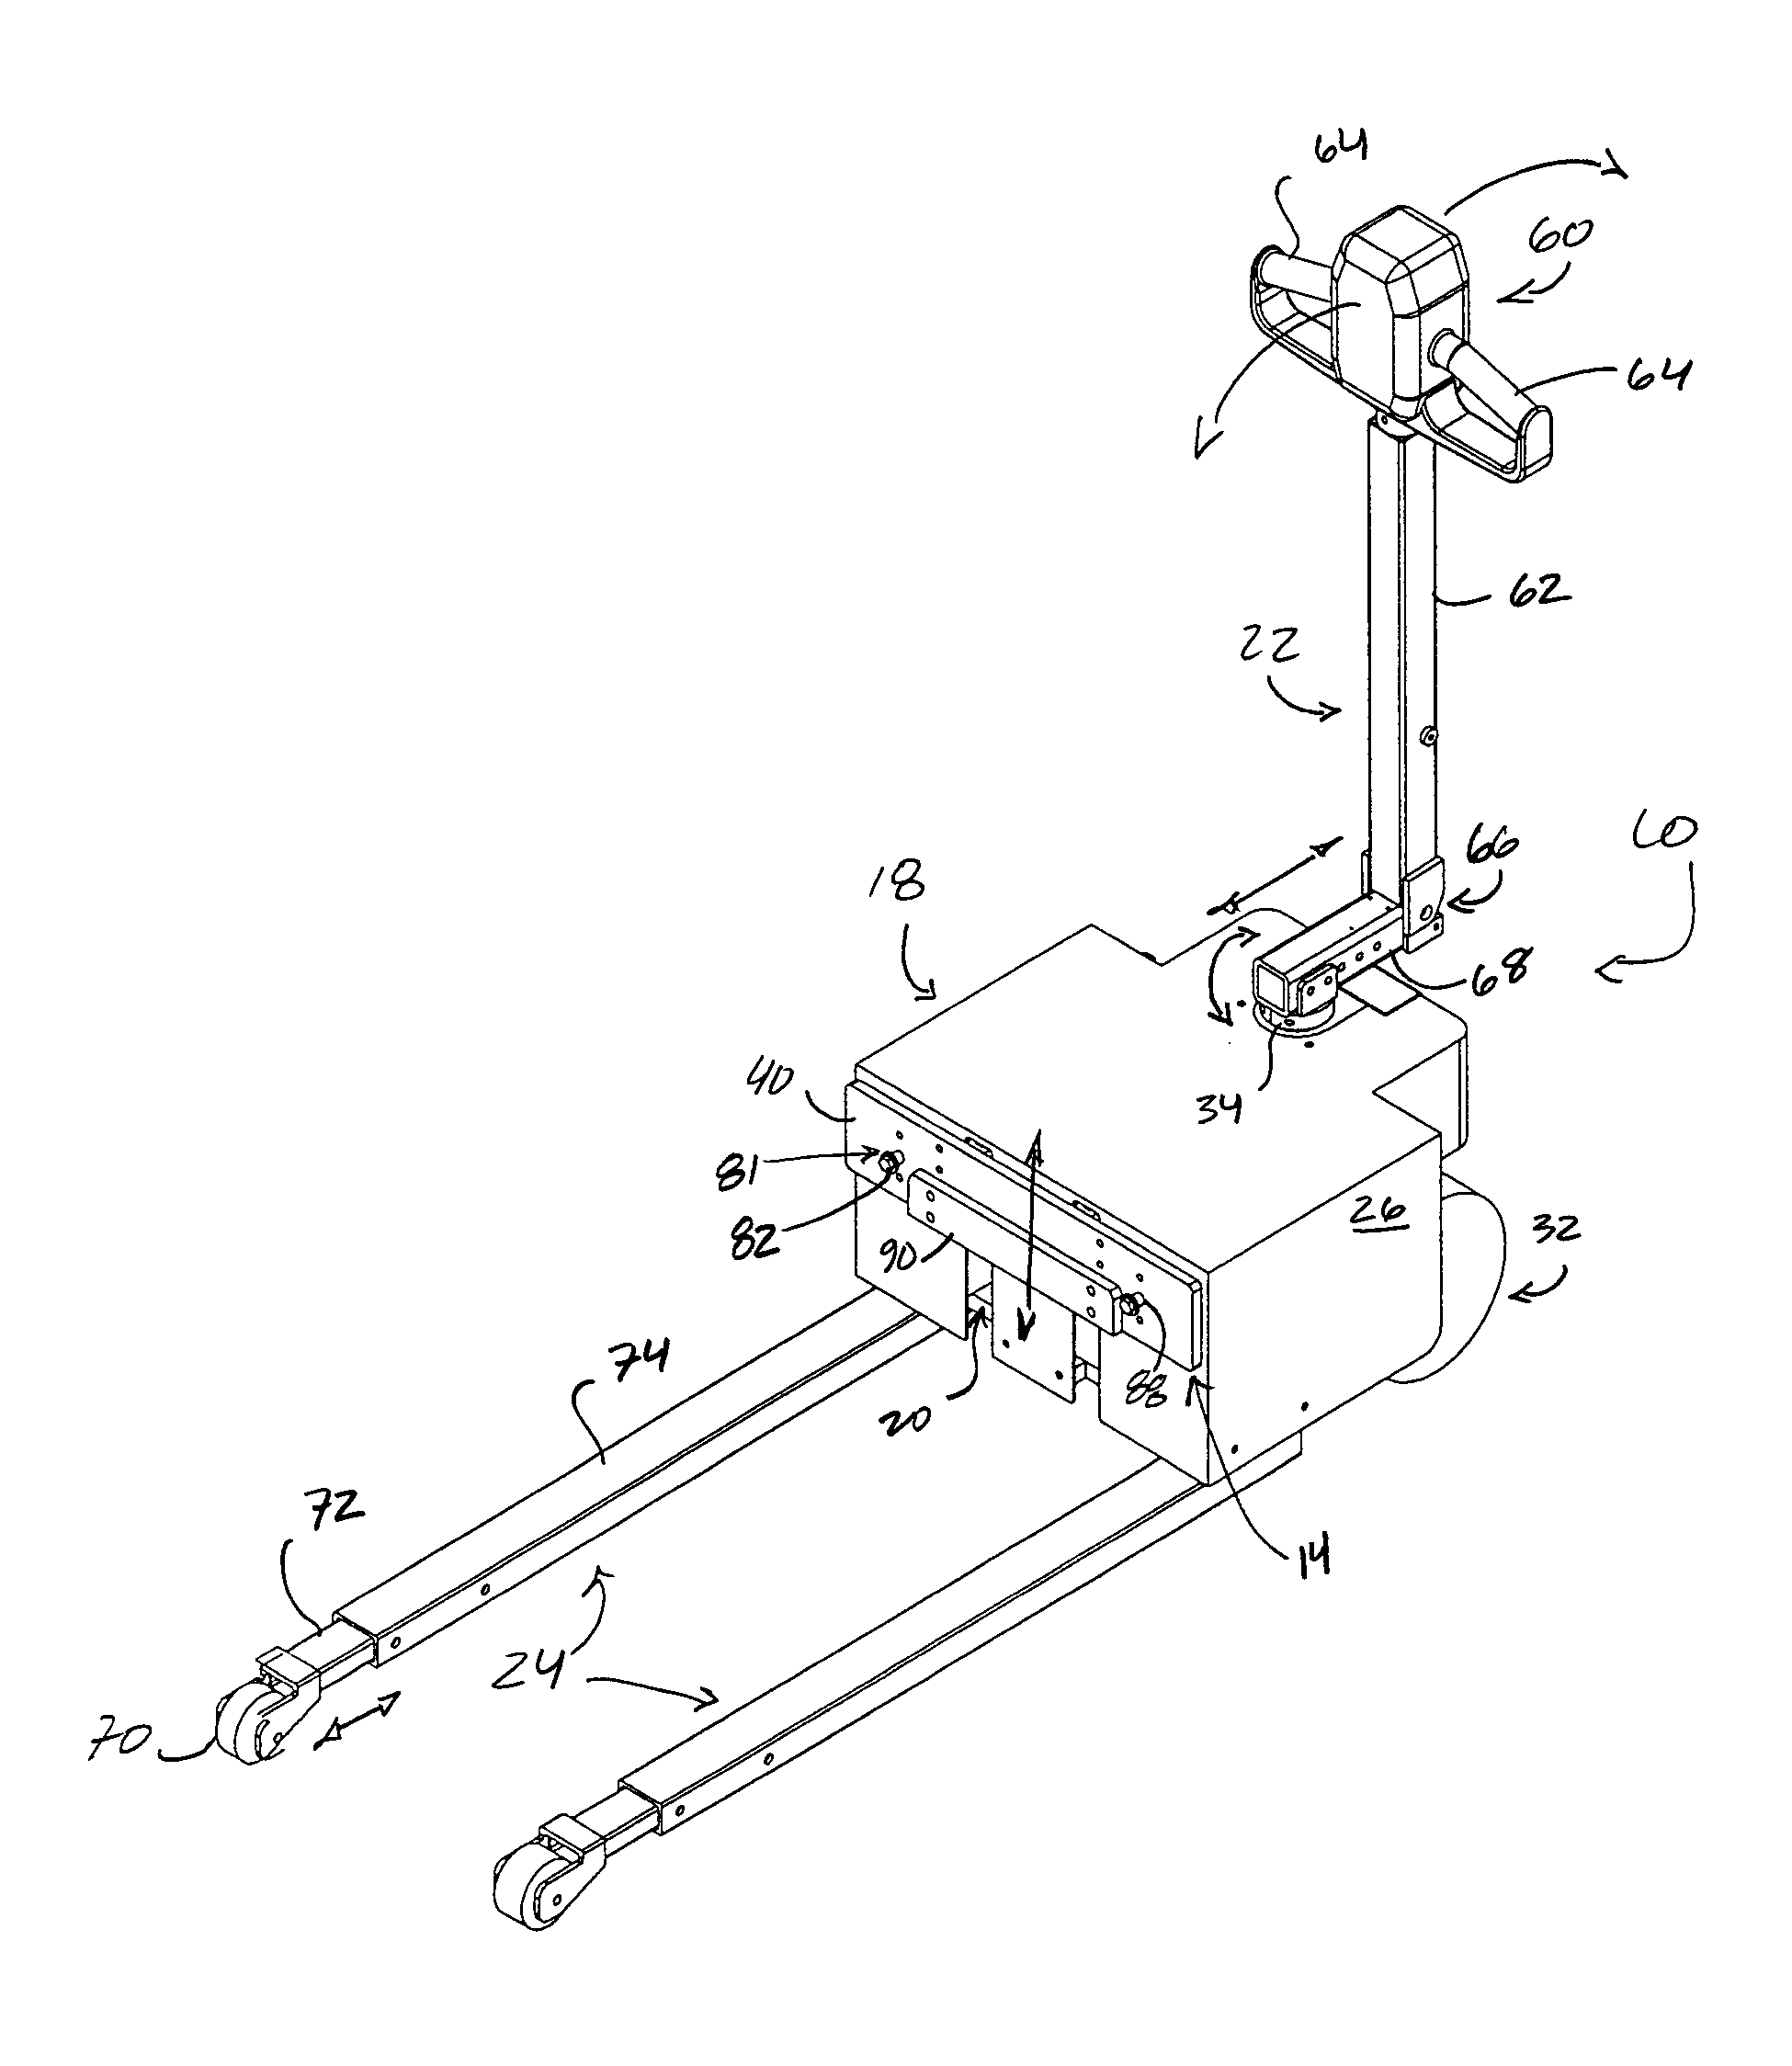 Transport aid for wheeled support apparatus